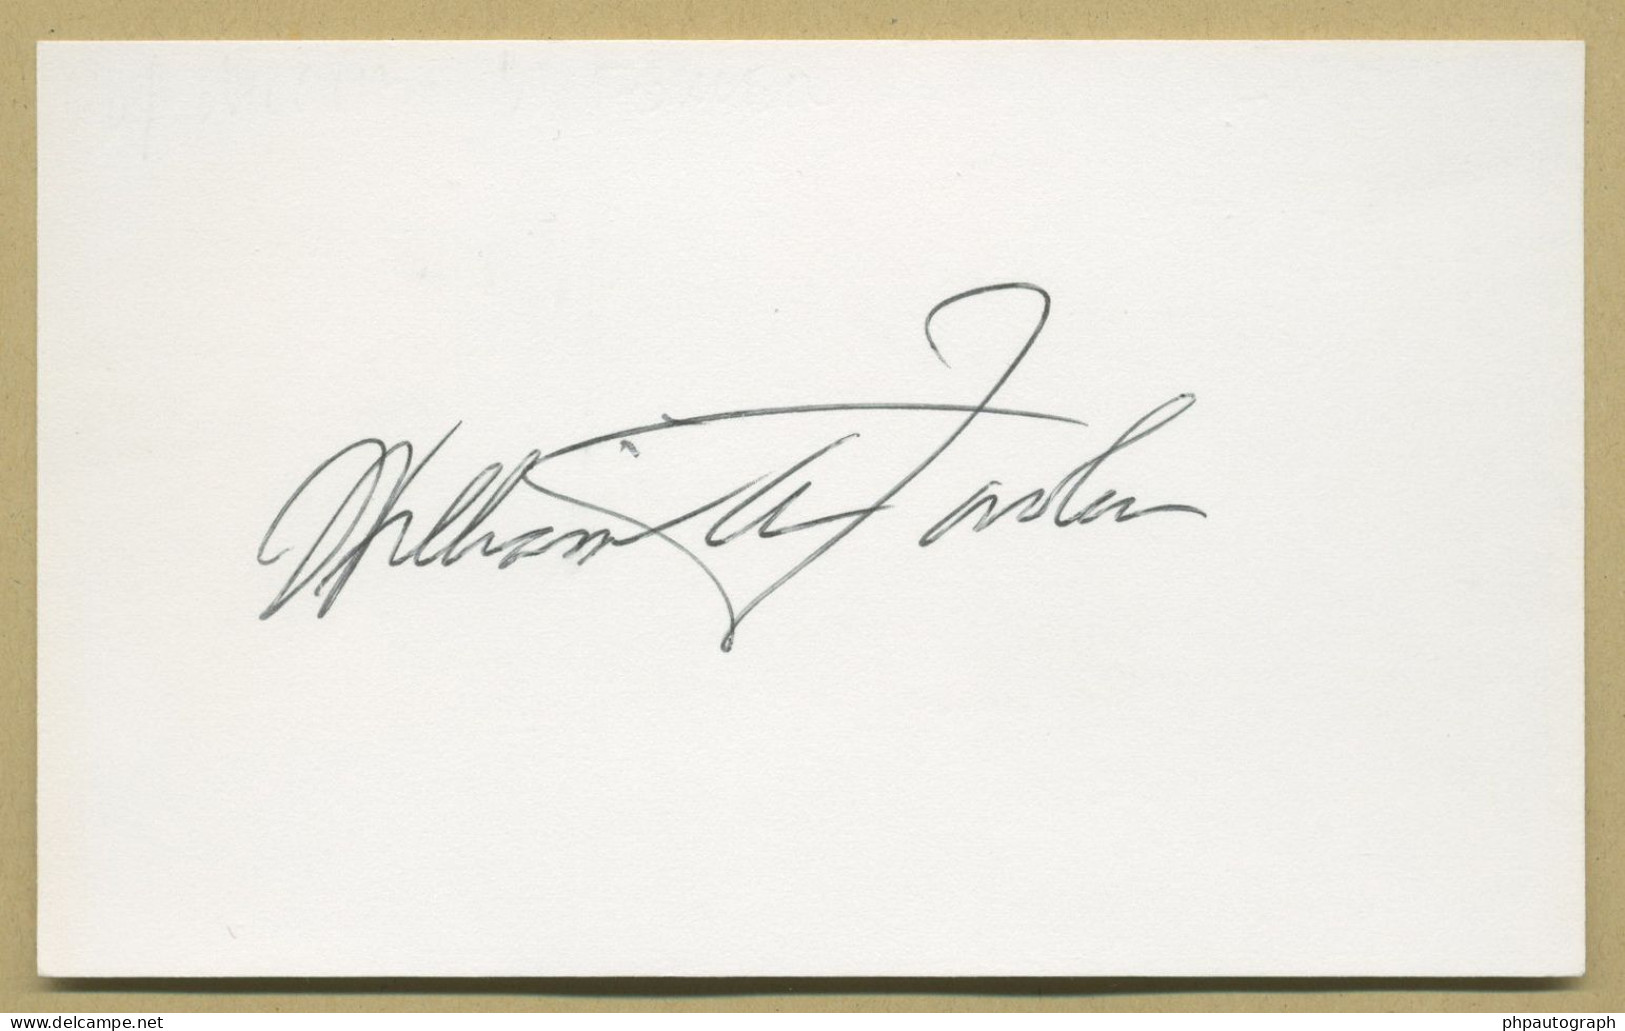 William Alfred Fowler (1911-1995) - Astrophysicist - Signed Card + Photo - 80s - Nobel Prize - Inventors & Scientists